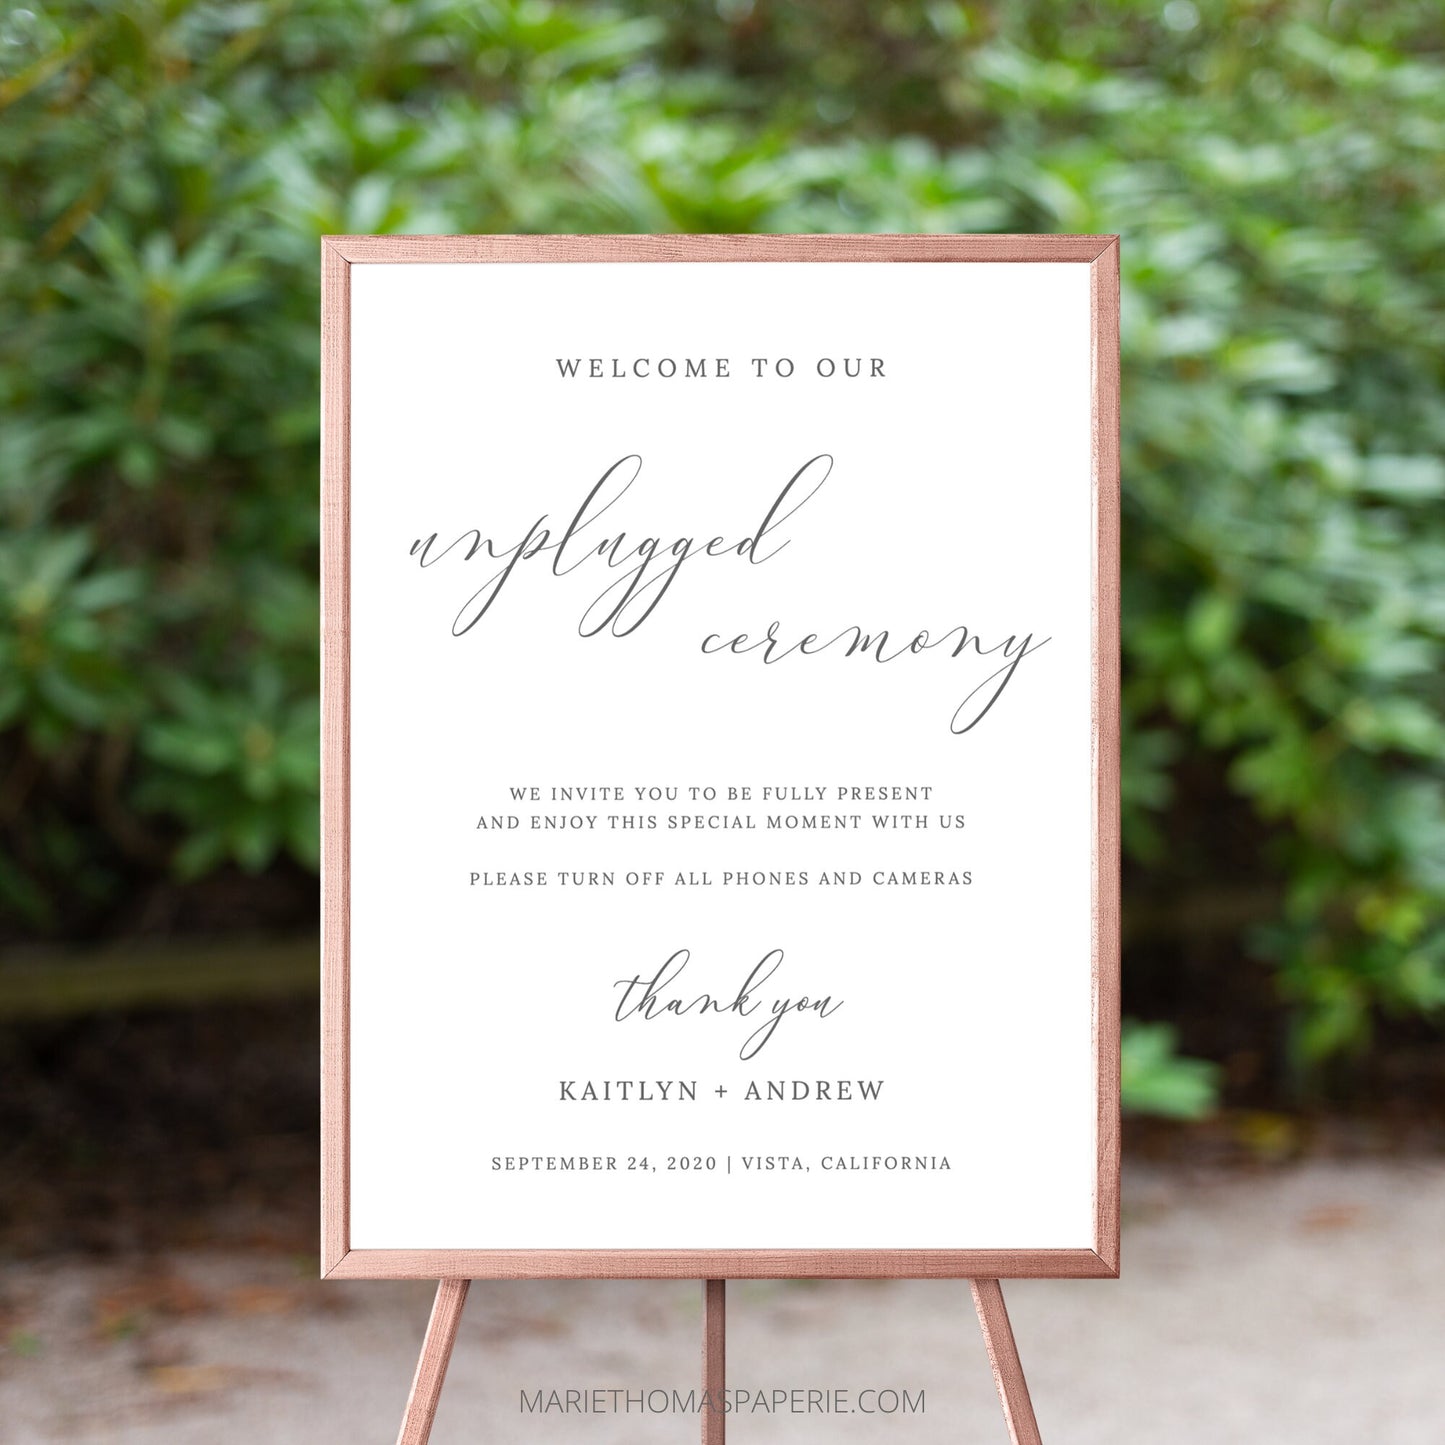 Editable Unplugged Wedding Sign Wedding Welcome Sign Modern Gray & White Template